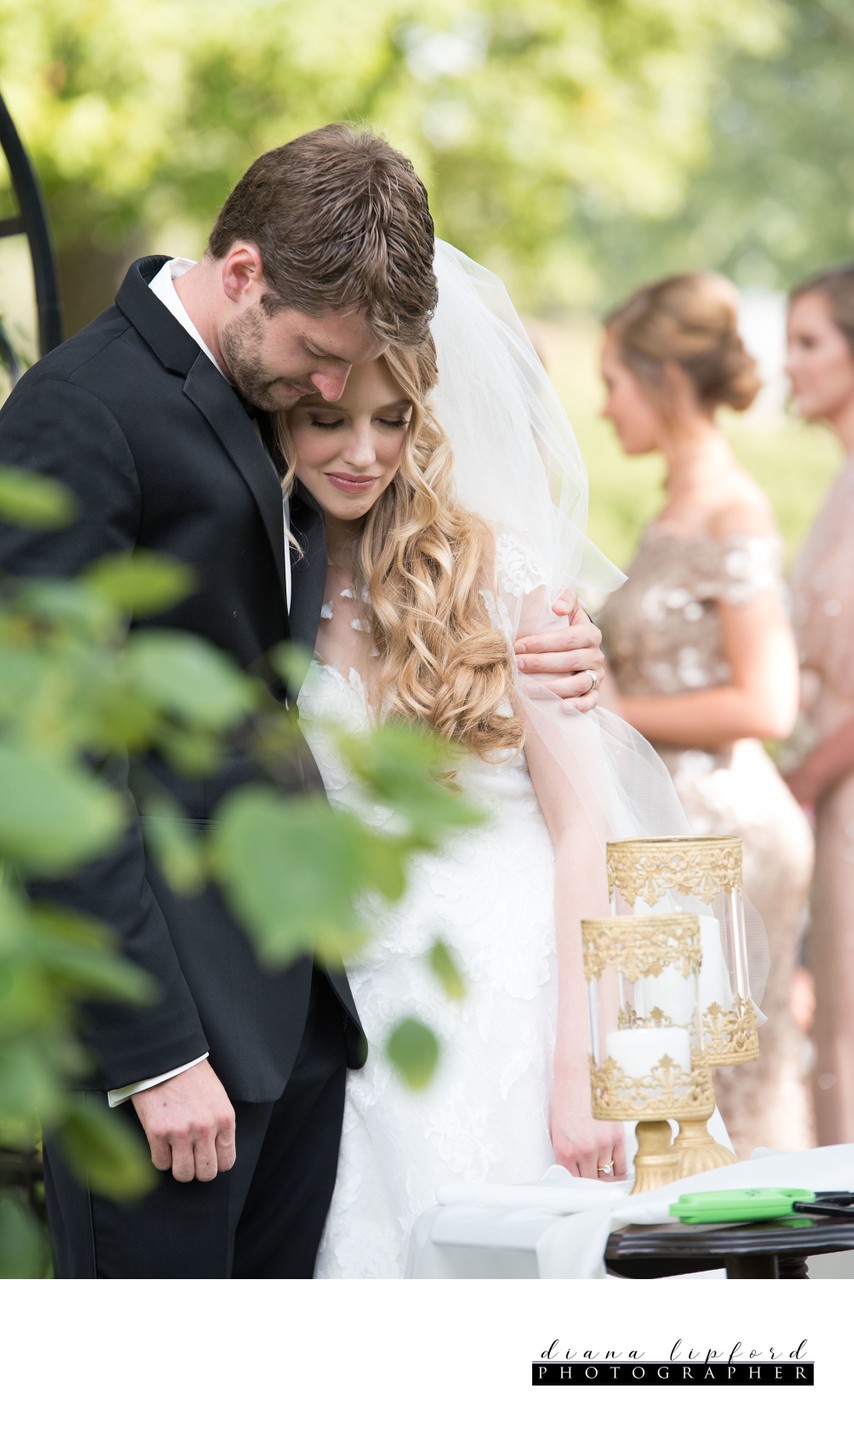 Elegant Wedding in Ft. Wayne at the Country Club